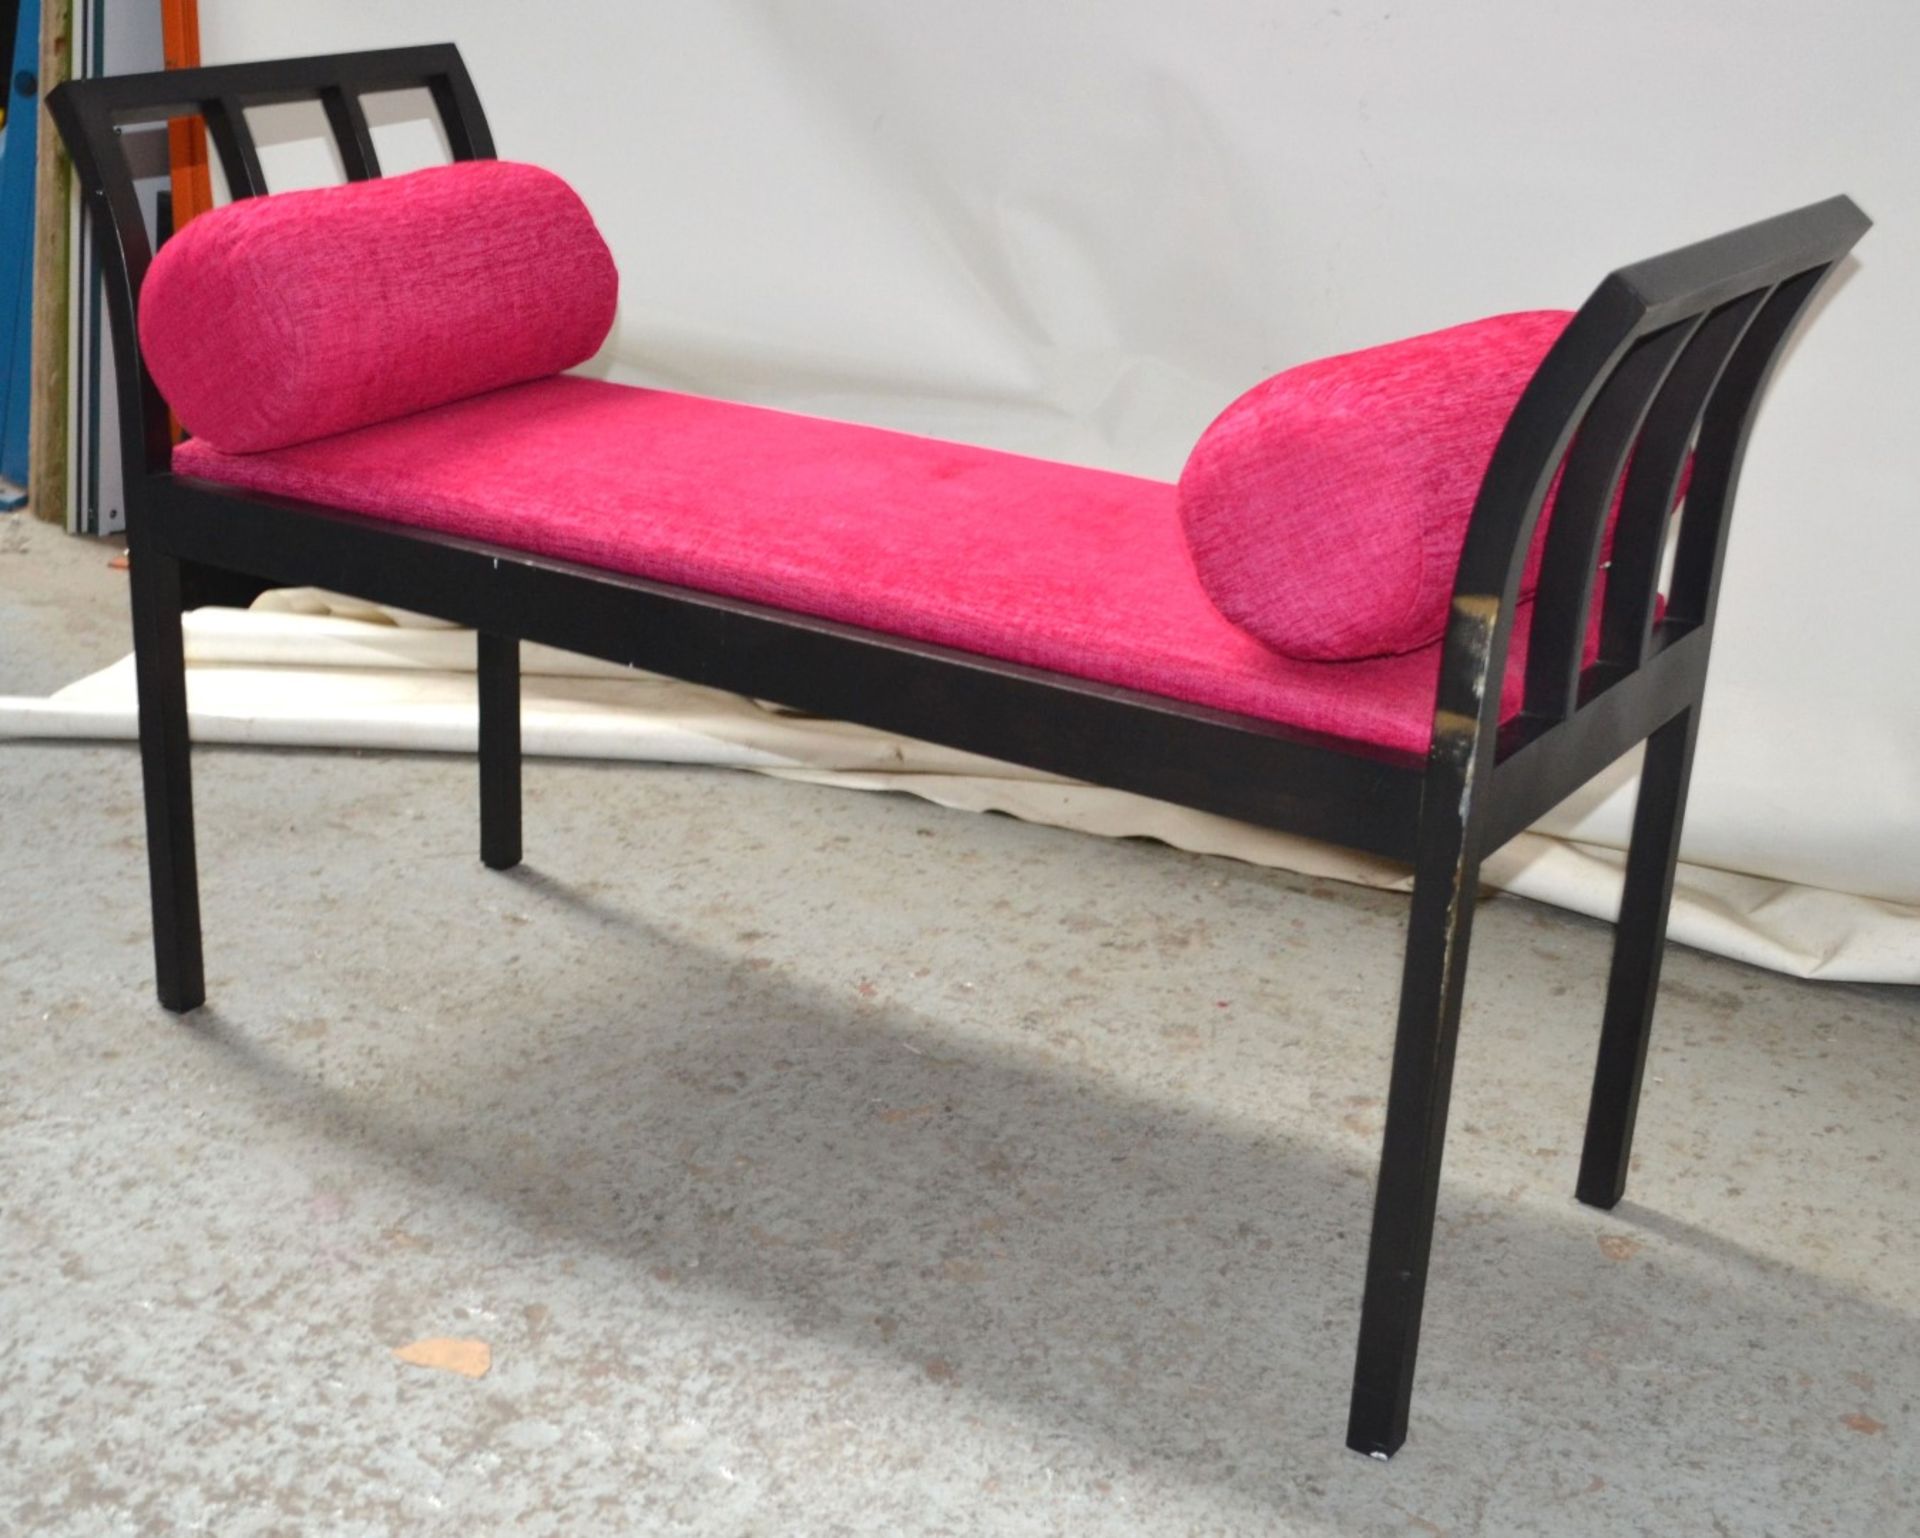 1 x Magenta Upholstered Bedroom Bench with 2 Cushions - CL314 - Location: Altrincham WA14 - *NO VAT - Image 5 of 11